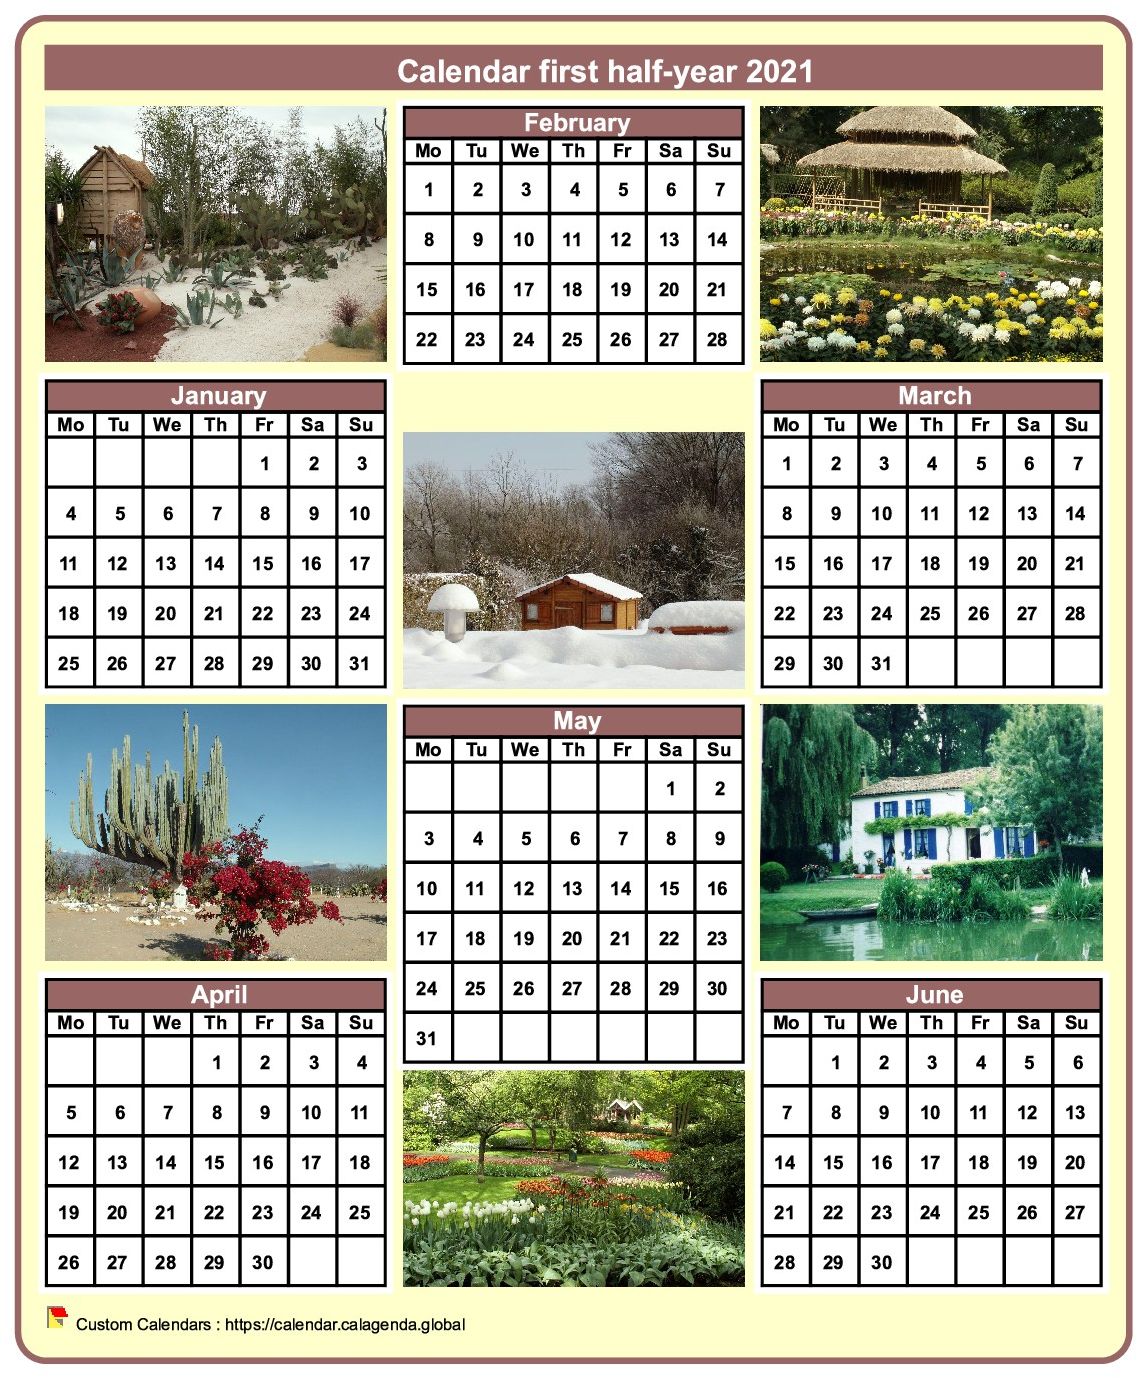 Calendar 2021 half-year with a different photo every month